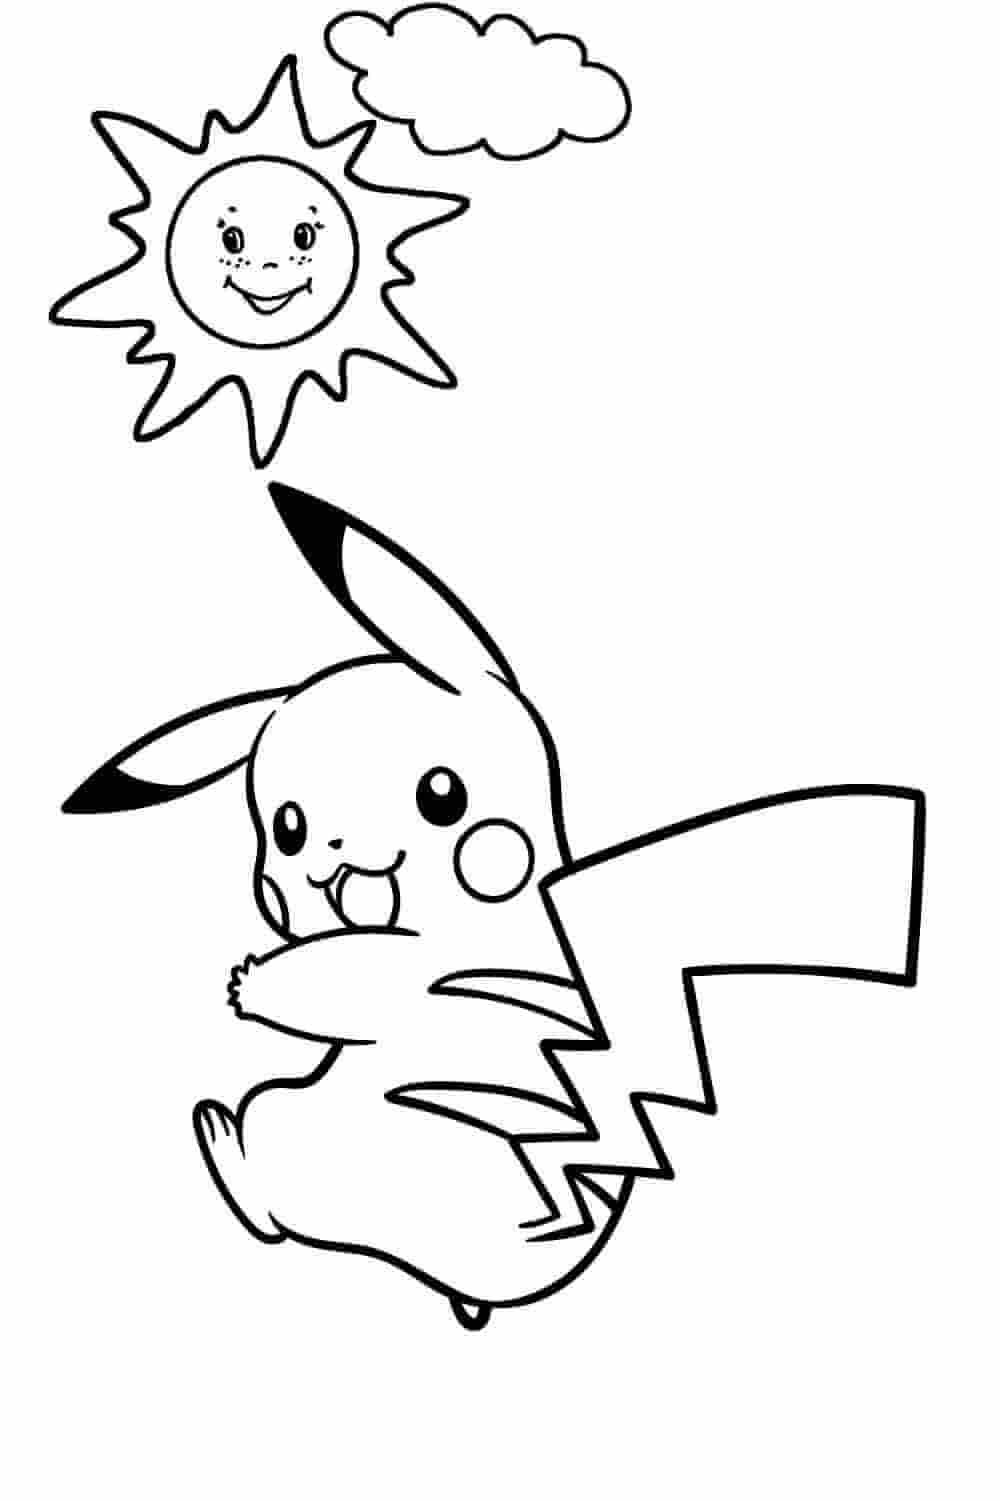 Pikachu in the sky coloring pages